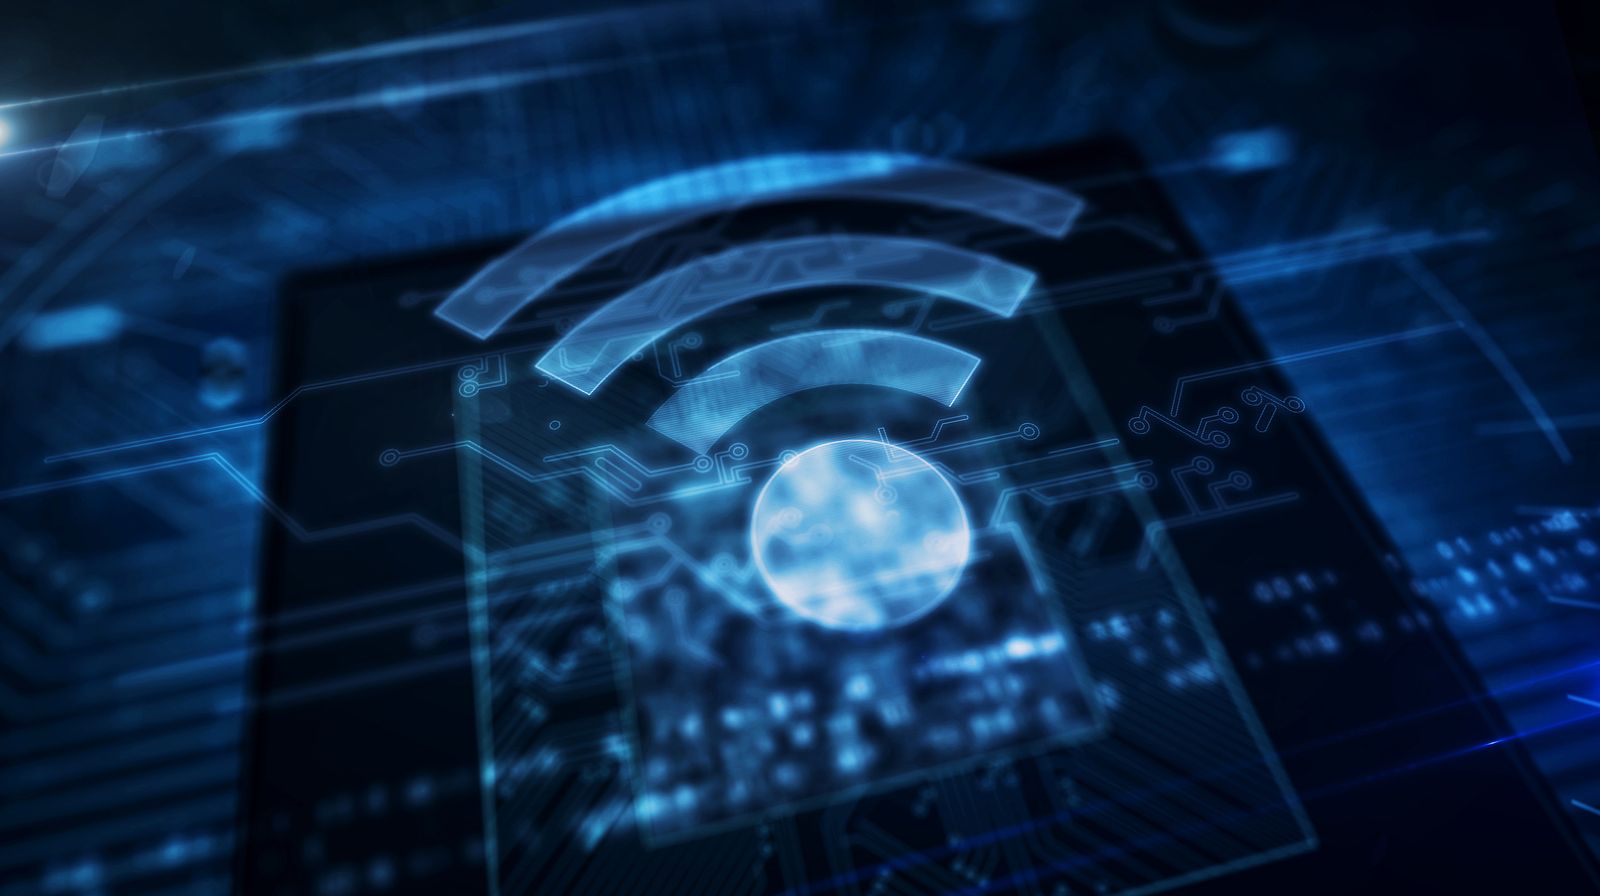 How to Kick People Off Wi-Fi - Smart DNS Proxy